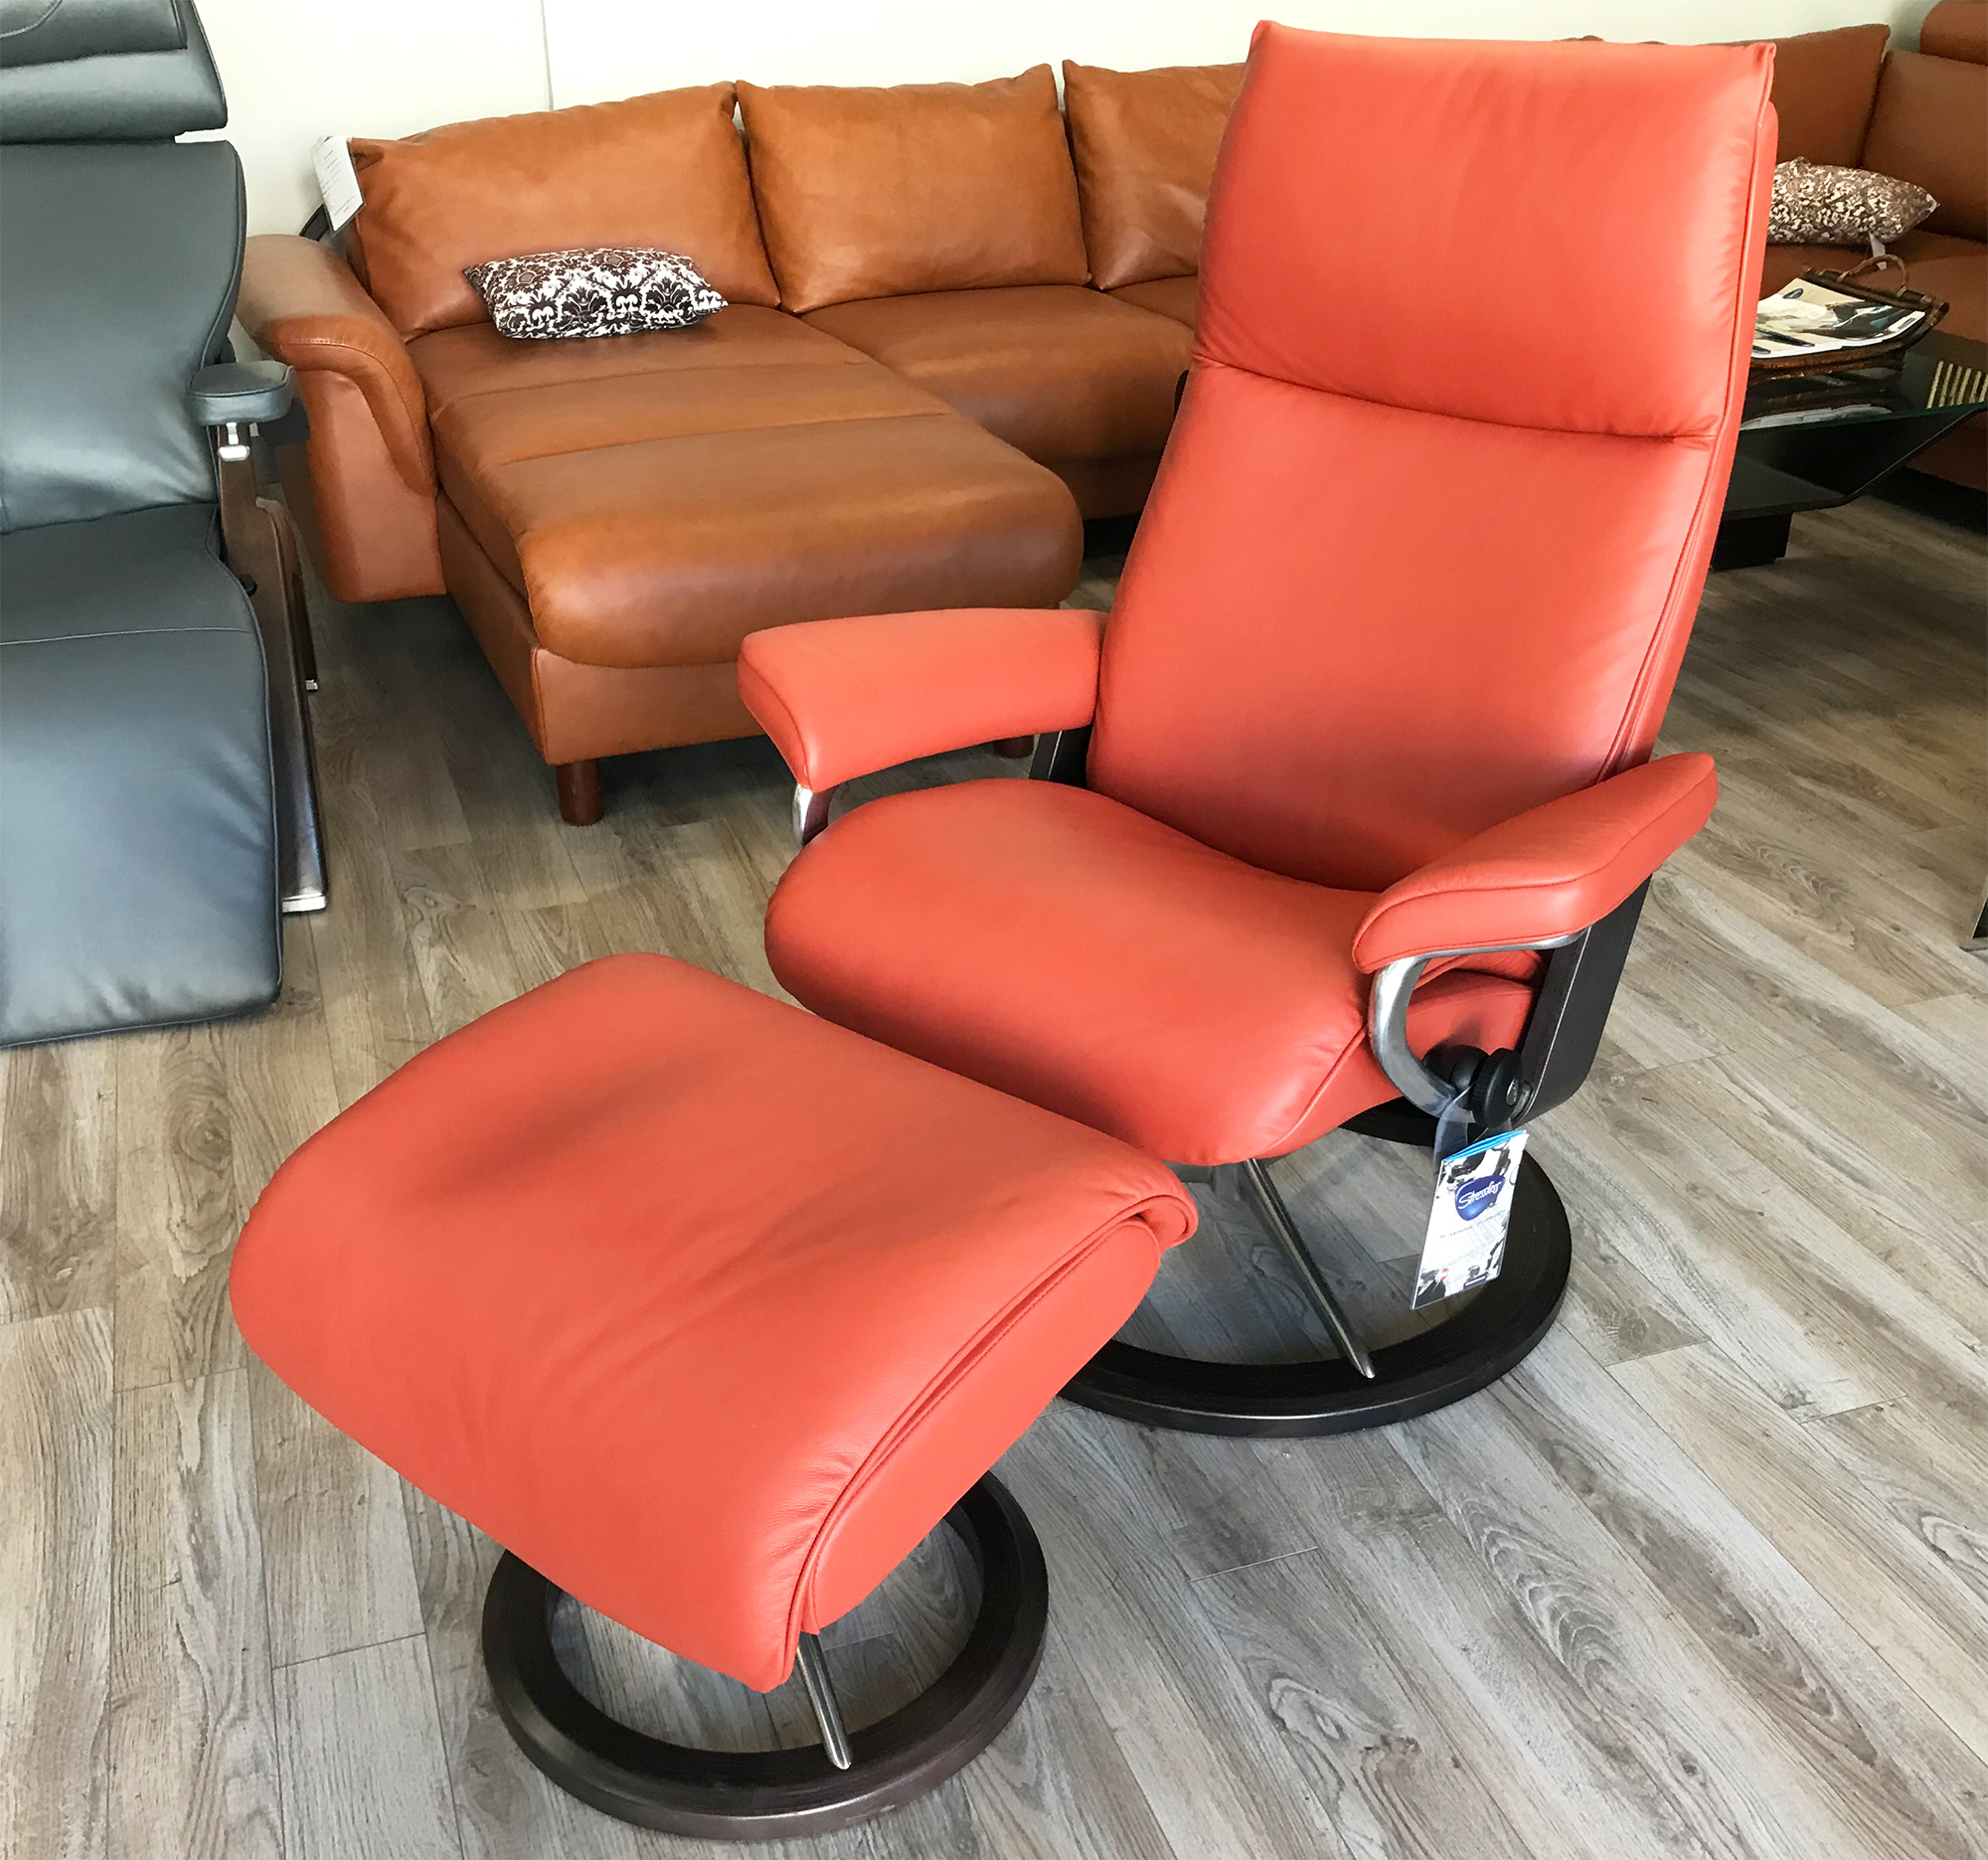 Stressless Aura Base Aura and Ottoman Henna Leather Paloma Signature Base - Leather Recliner Recliners Signature Chair by Ekornes Henna Paloma Stressless Chairs